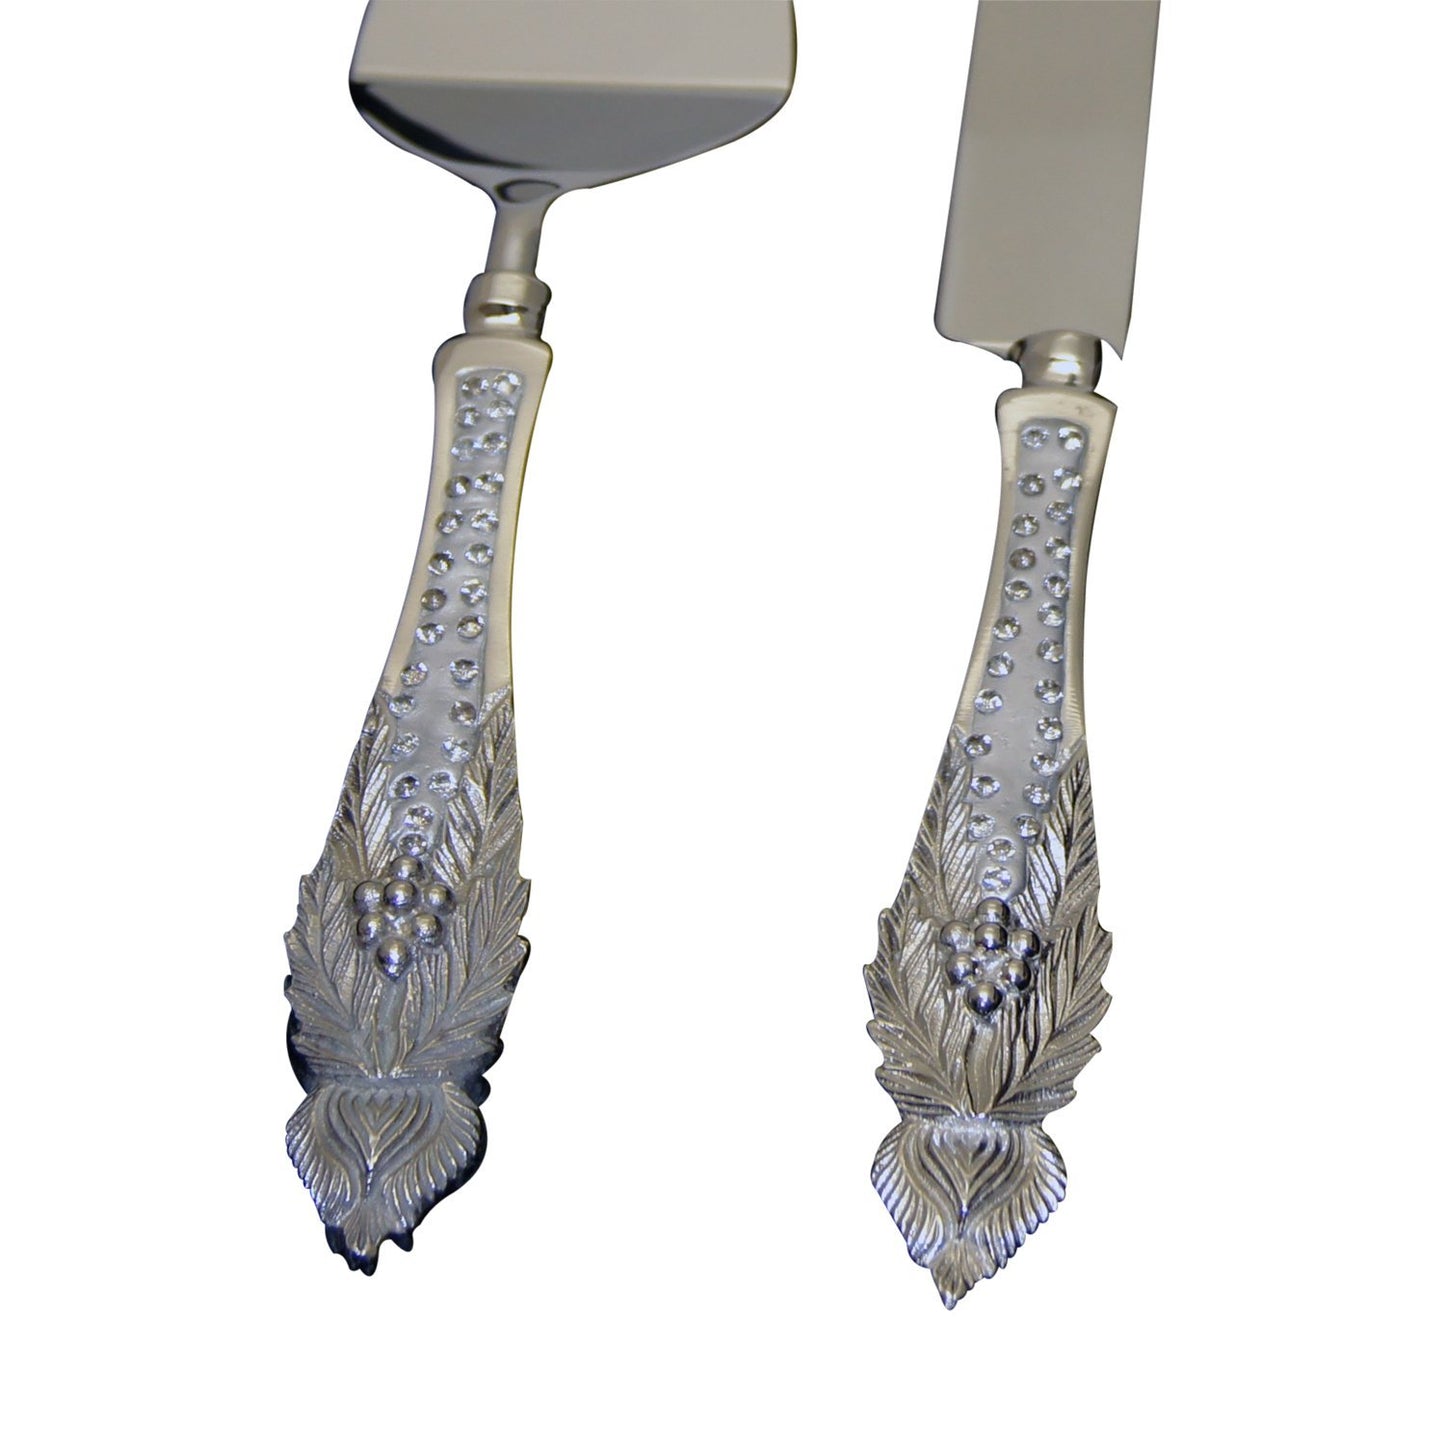 GiftBay Wedding Cake Knife & Server Set of 2 Pieces in Wooden Velvet Box., 12" L, Silver, Handles with Crystals